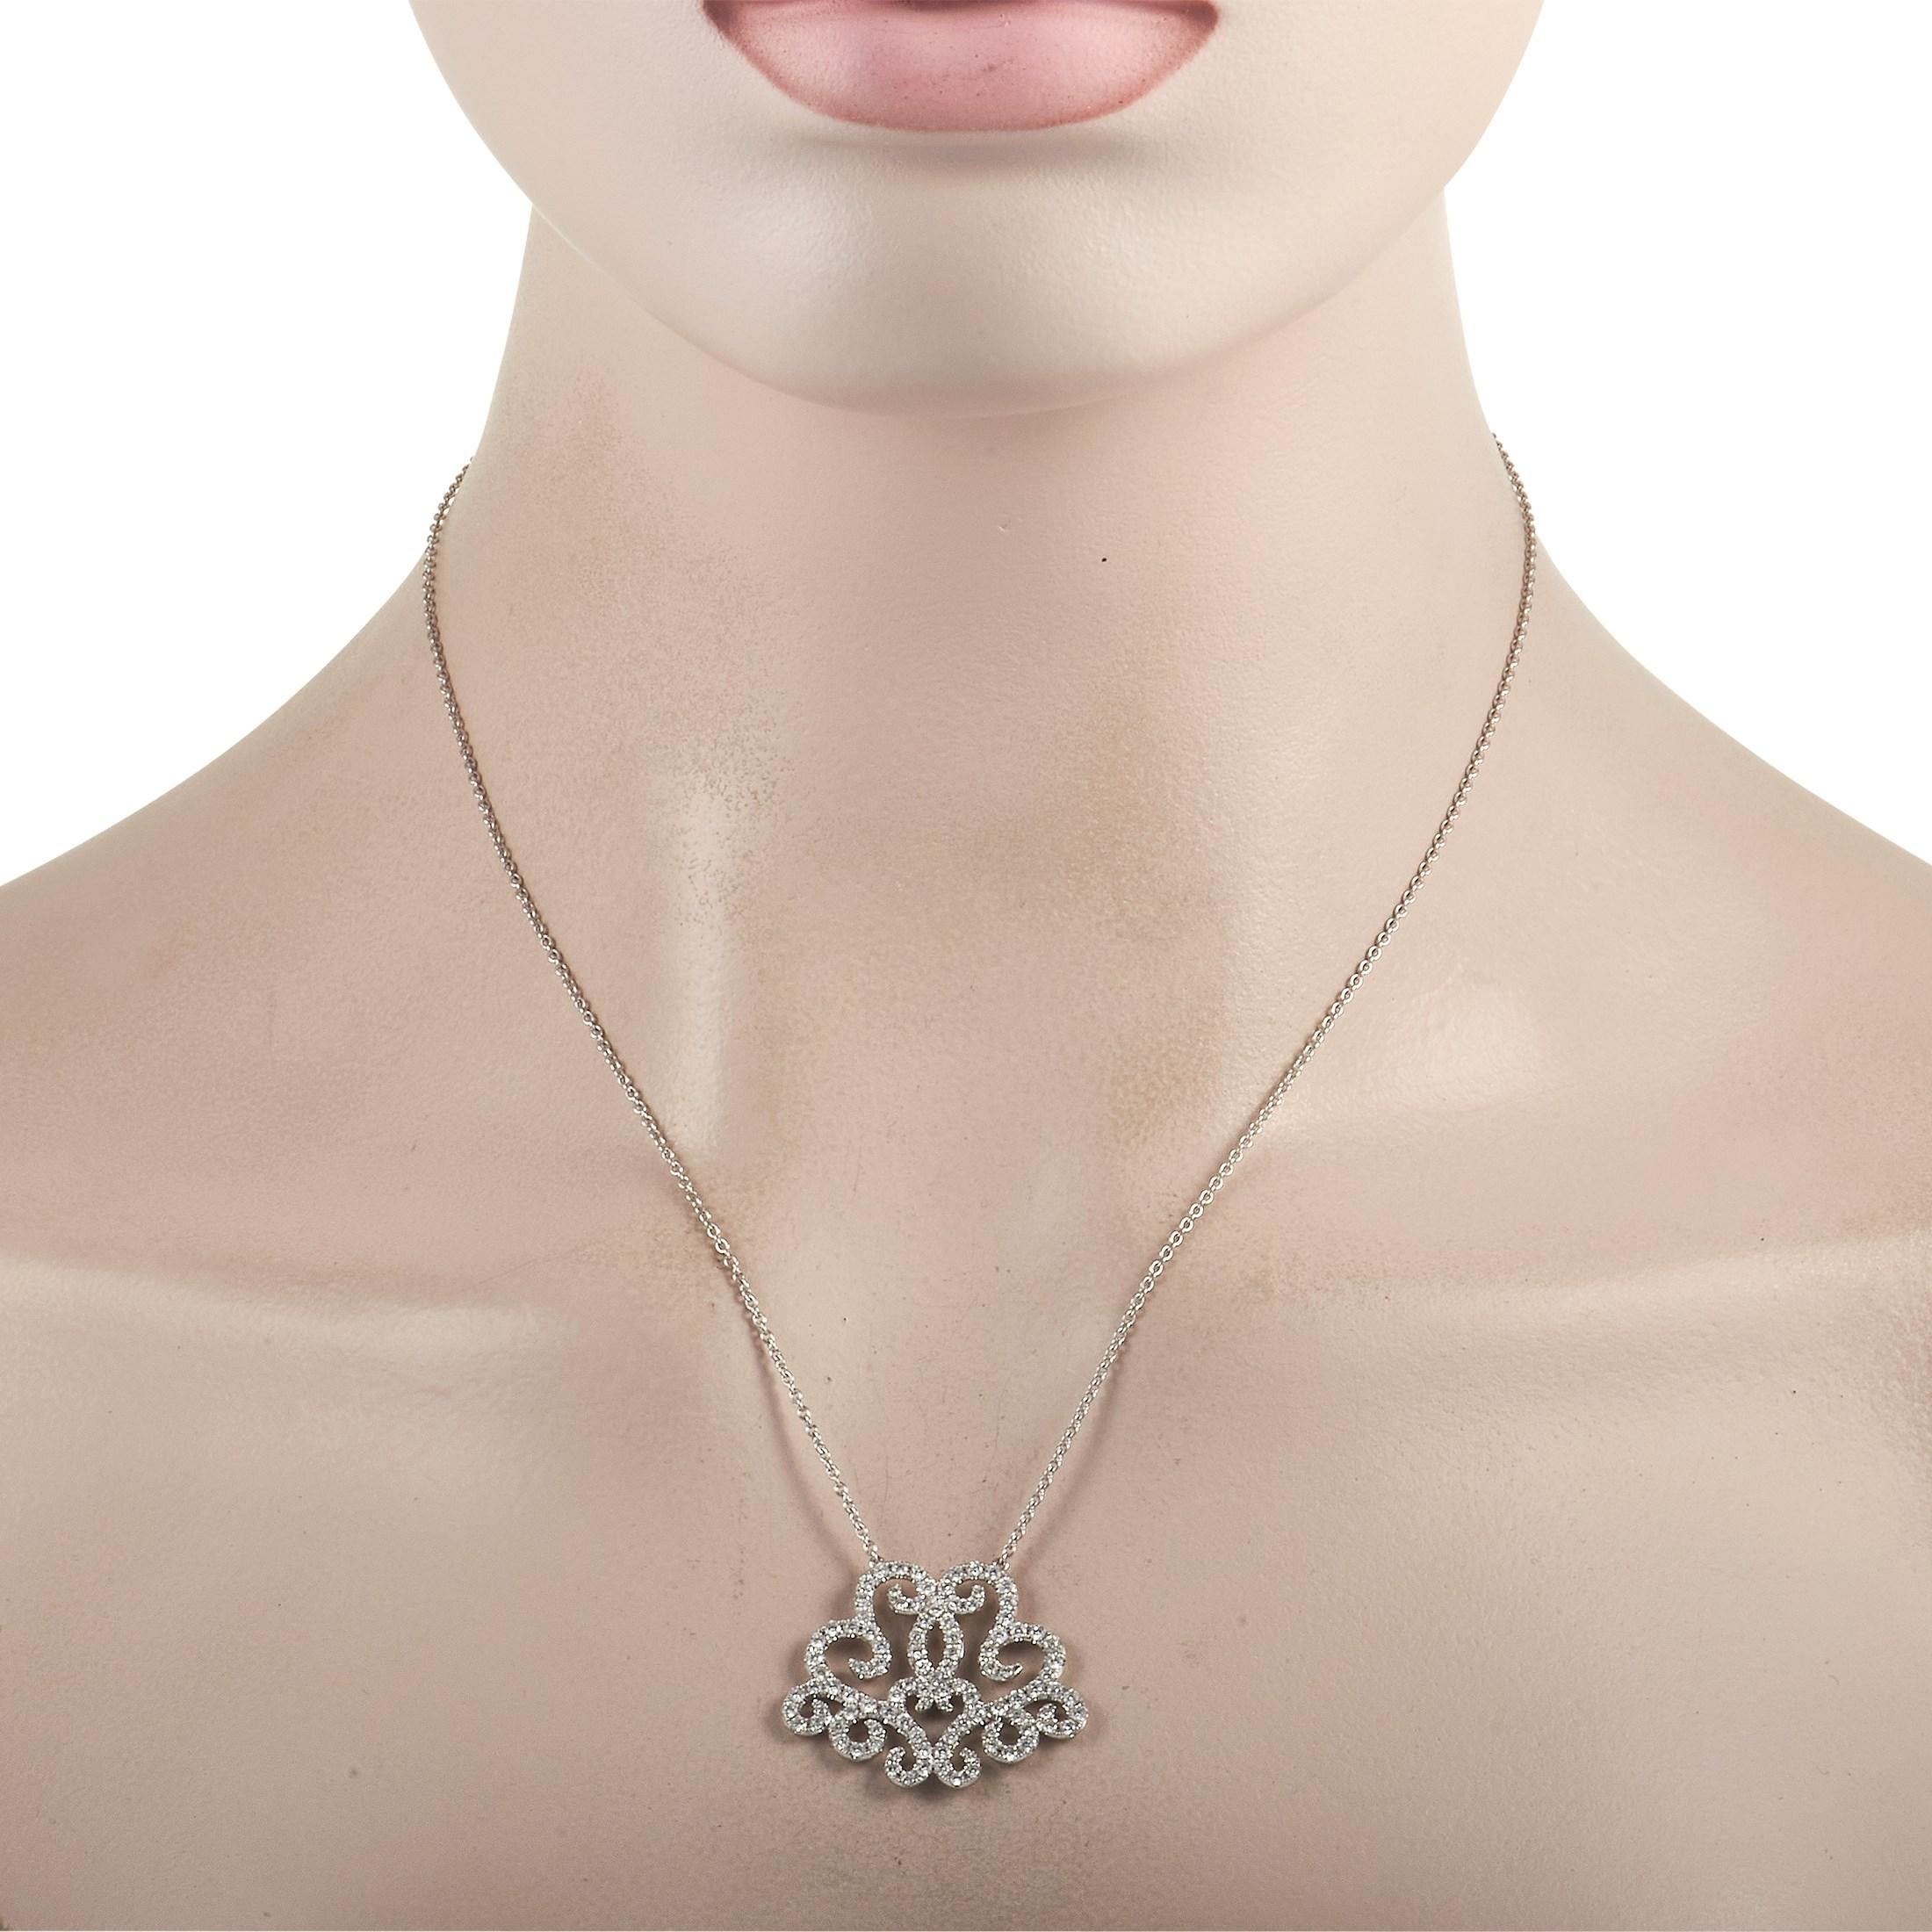 An artfully designed jewel, this LB Exclusive 18K White Gold 1.81 ct Diamond Lace Pendant Necklace makes a dainty but dazzling accessory. The pendant is fashioned from 18K white gold and sculpted to form an ornamental lacework design. The pendant